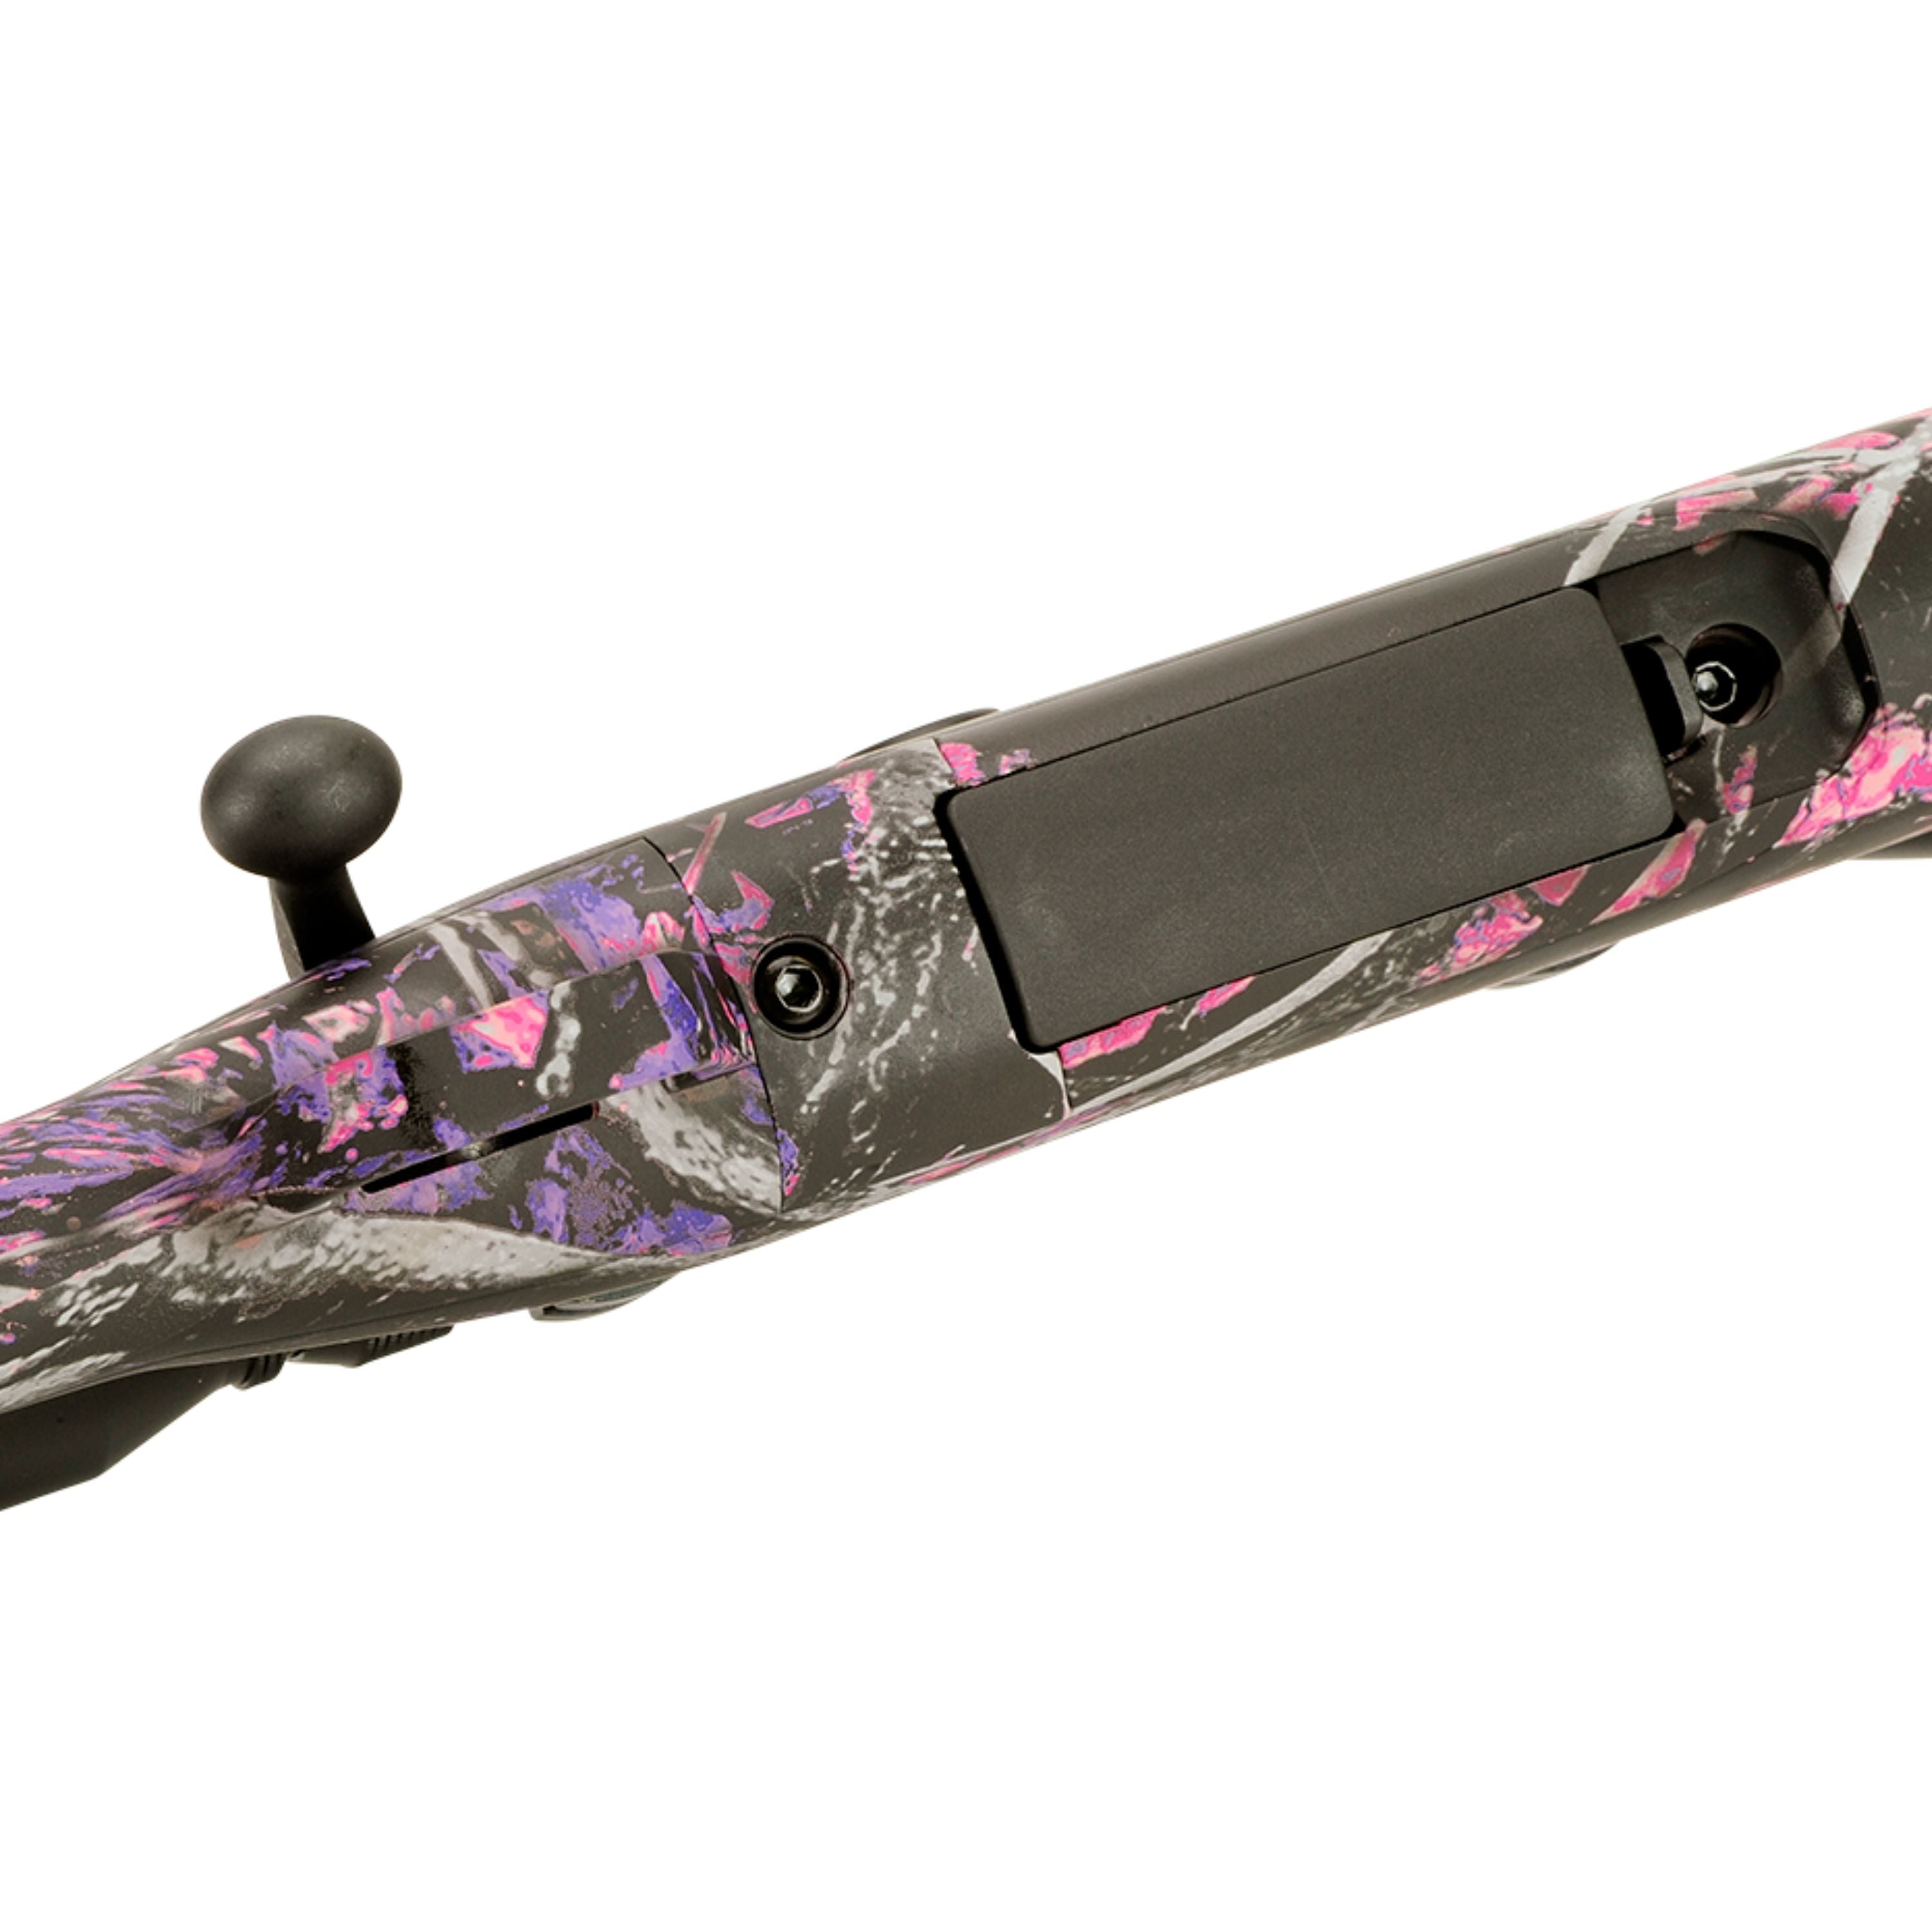 "AXIS XP Compact Muddy Girl" cal. 7mm-08 REM bolt action rifle with scope